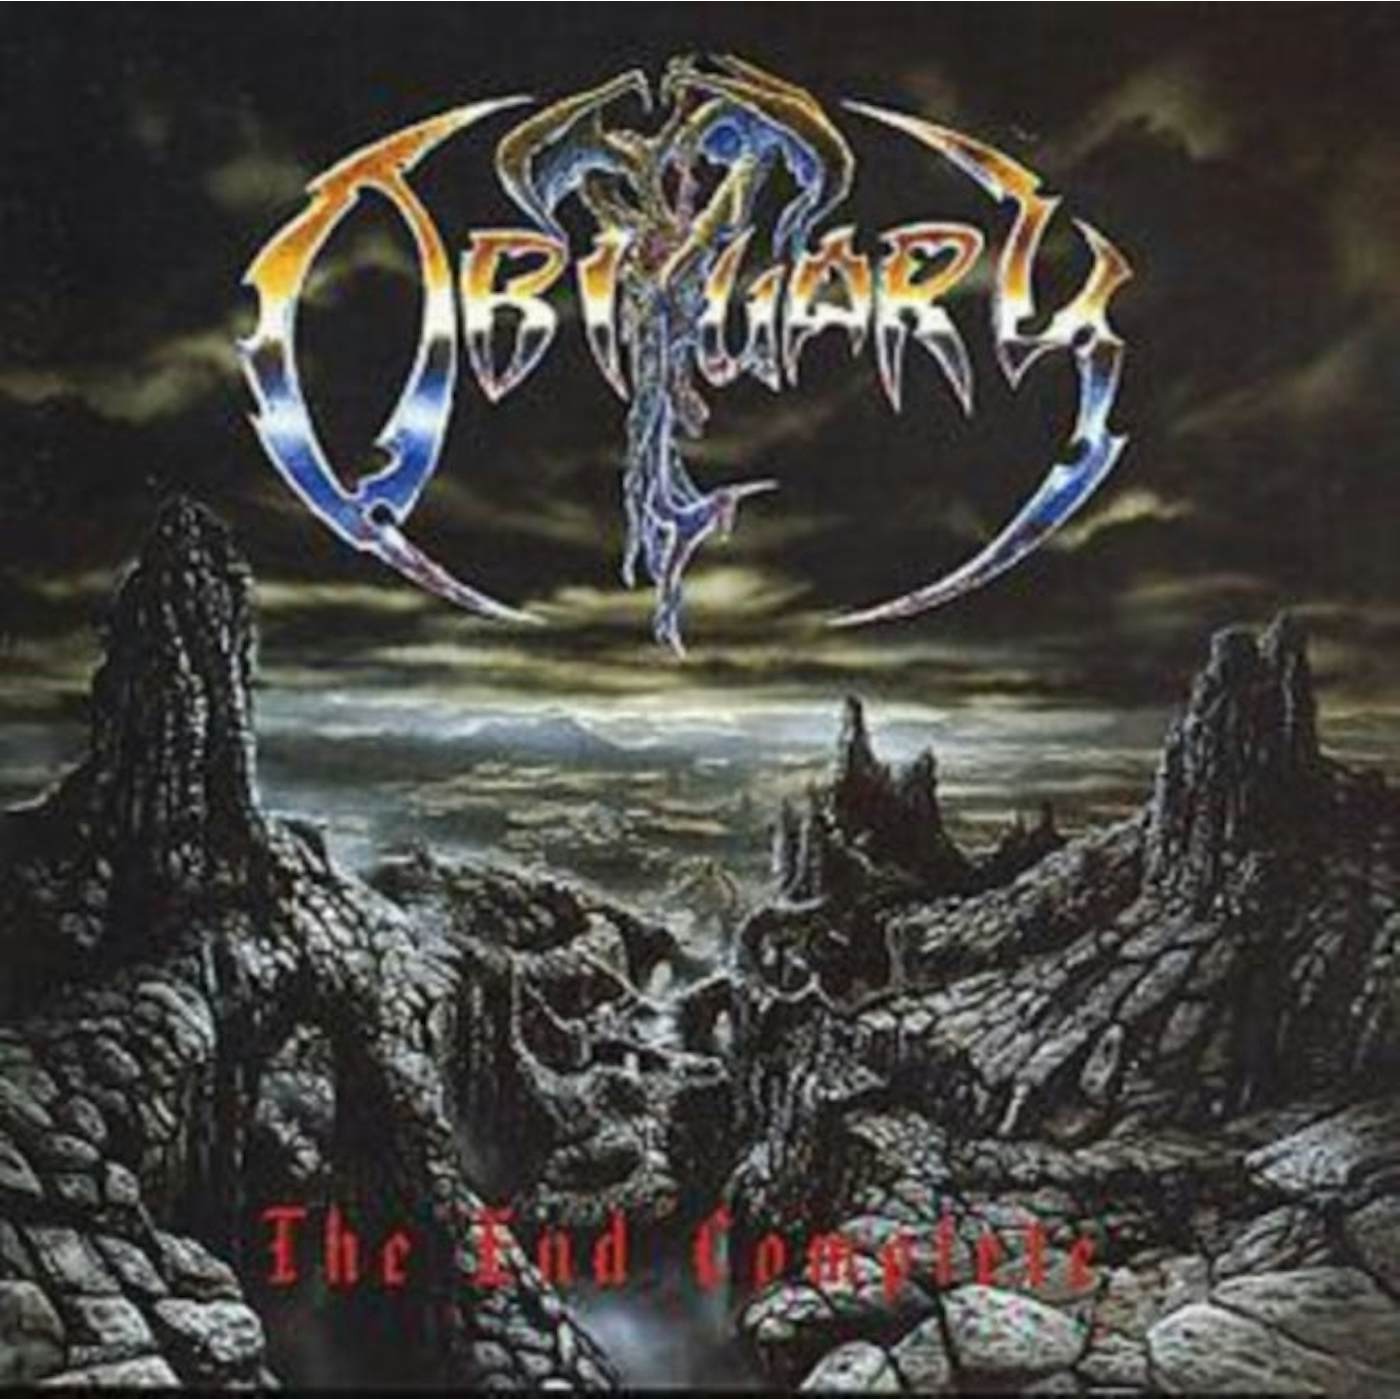 Obituary CD - The End Complete